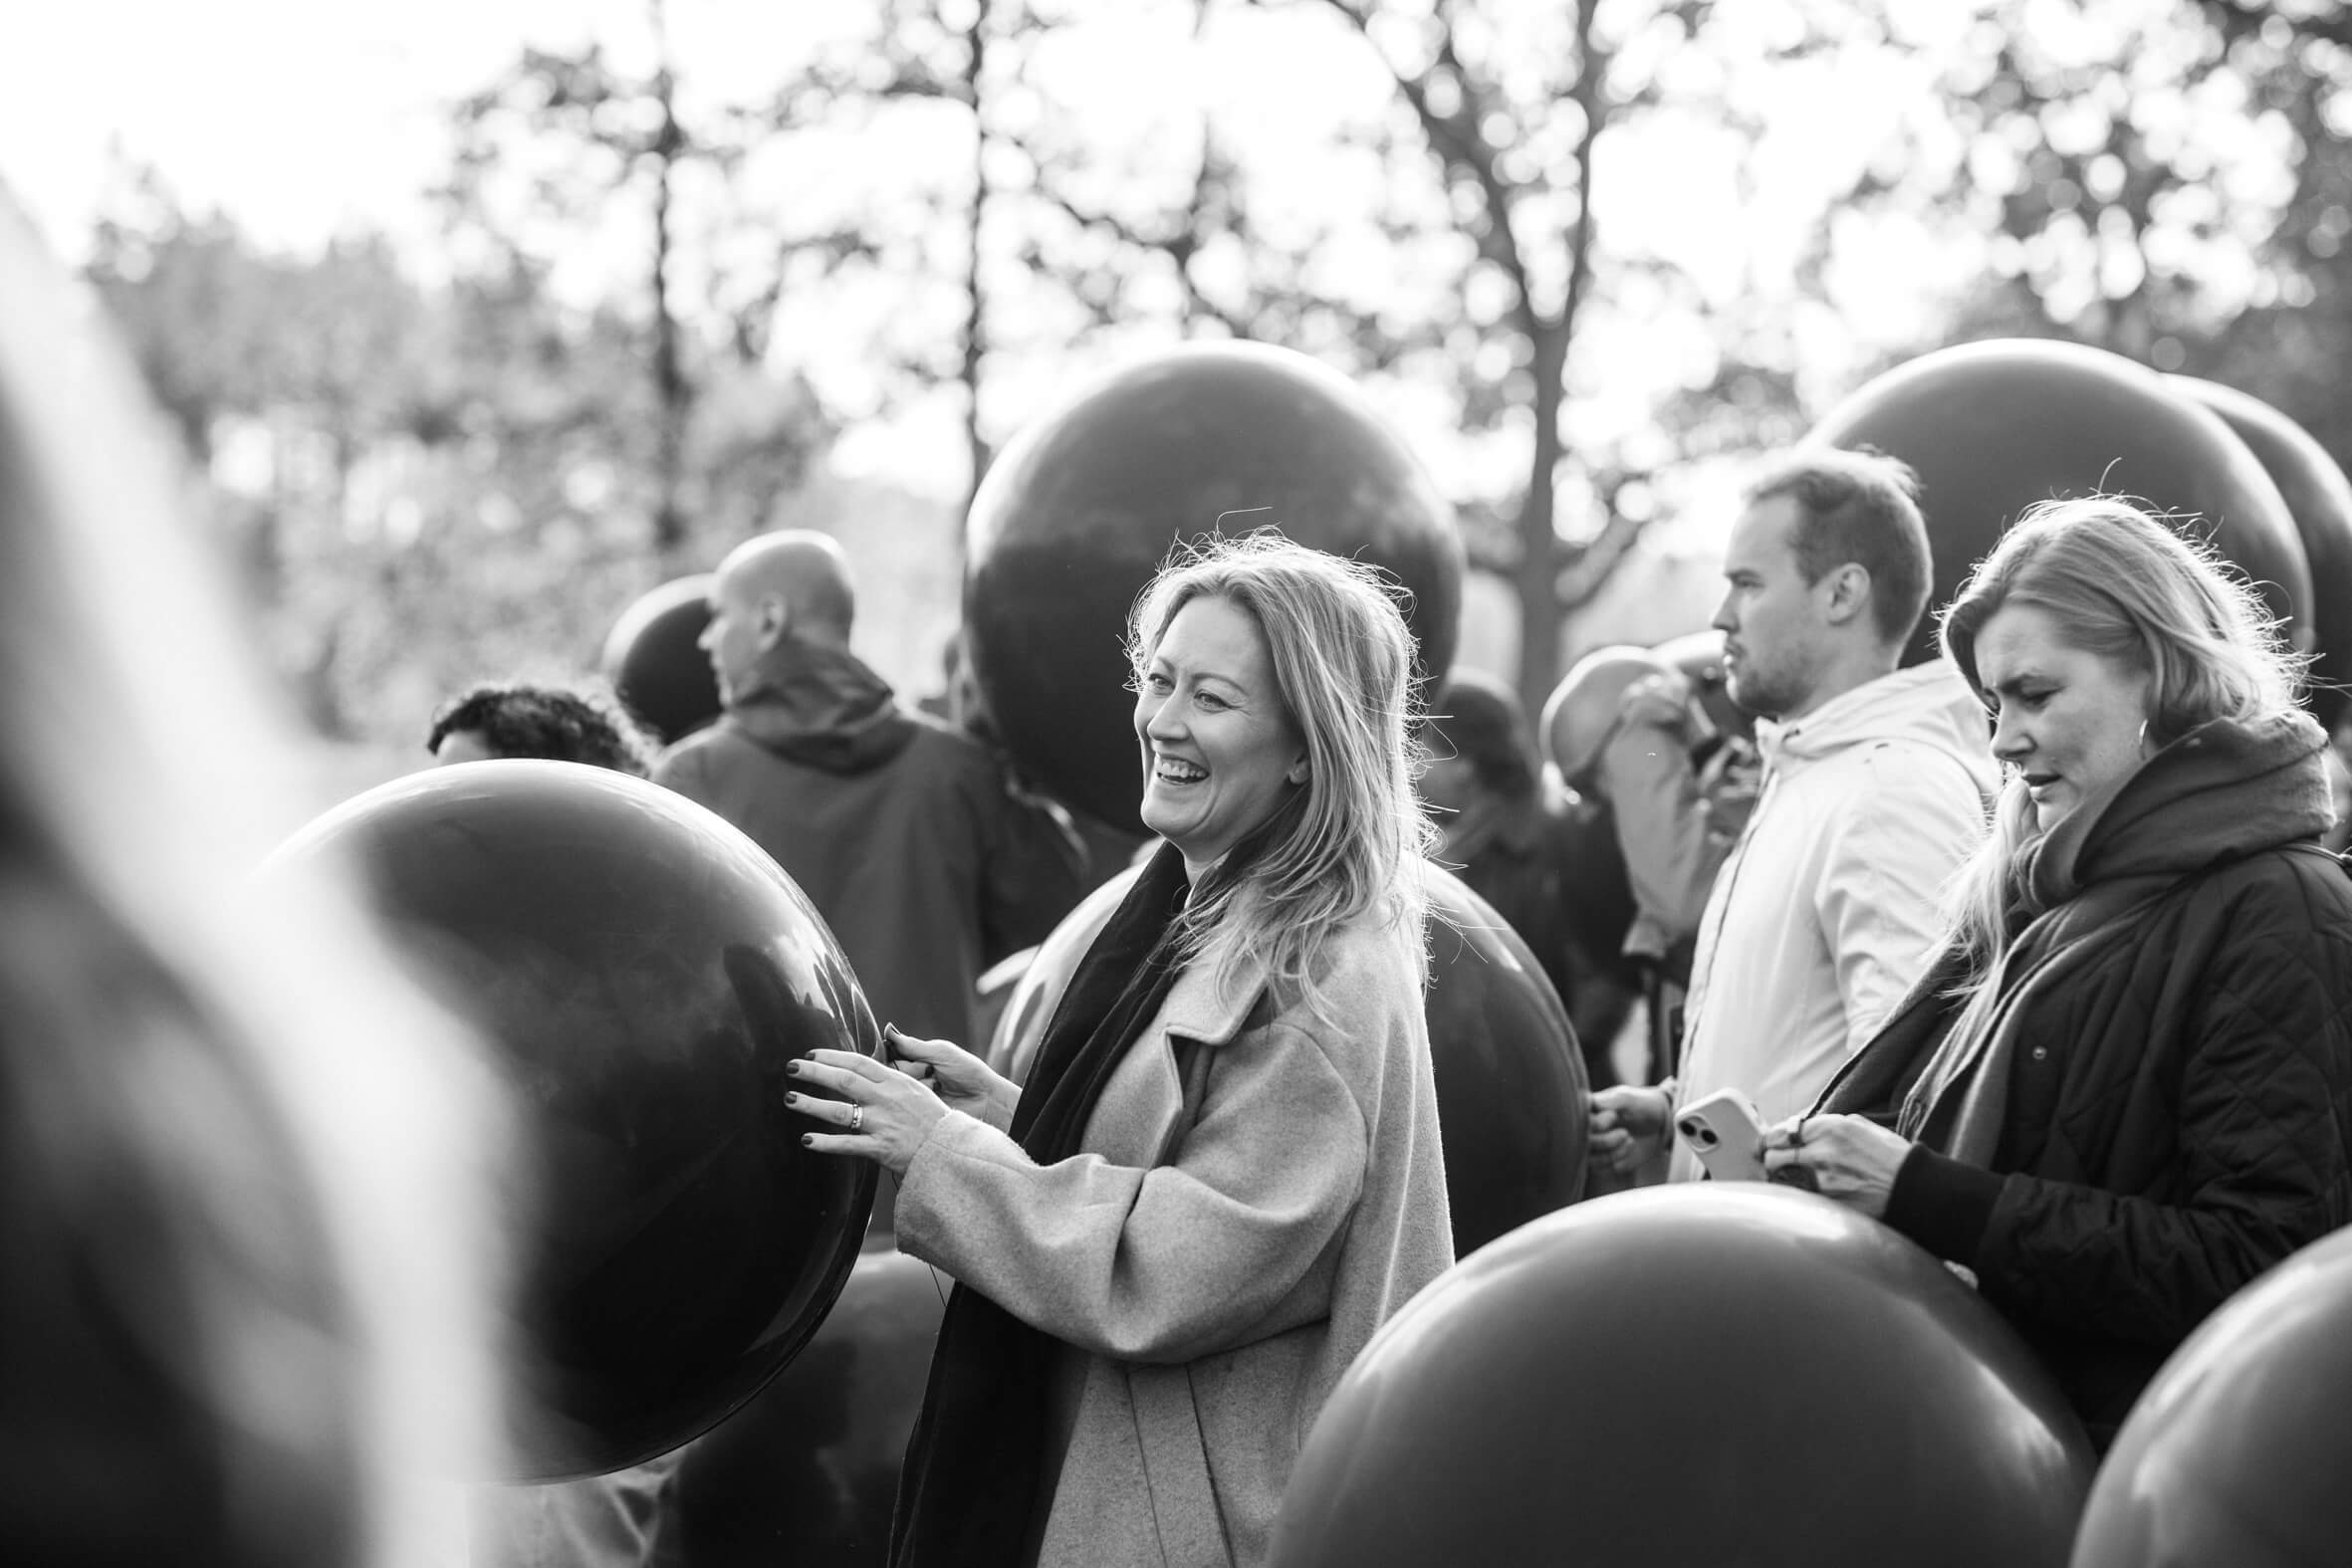 blonde-woman-laughing-holding-balloon-team-building-activity